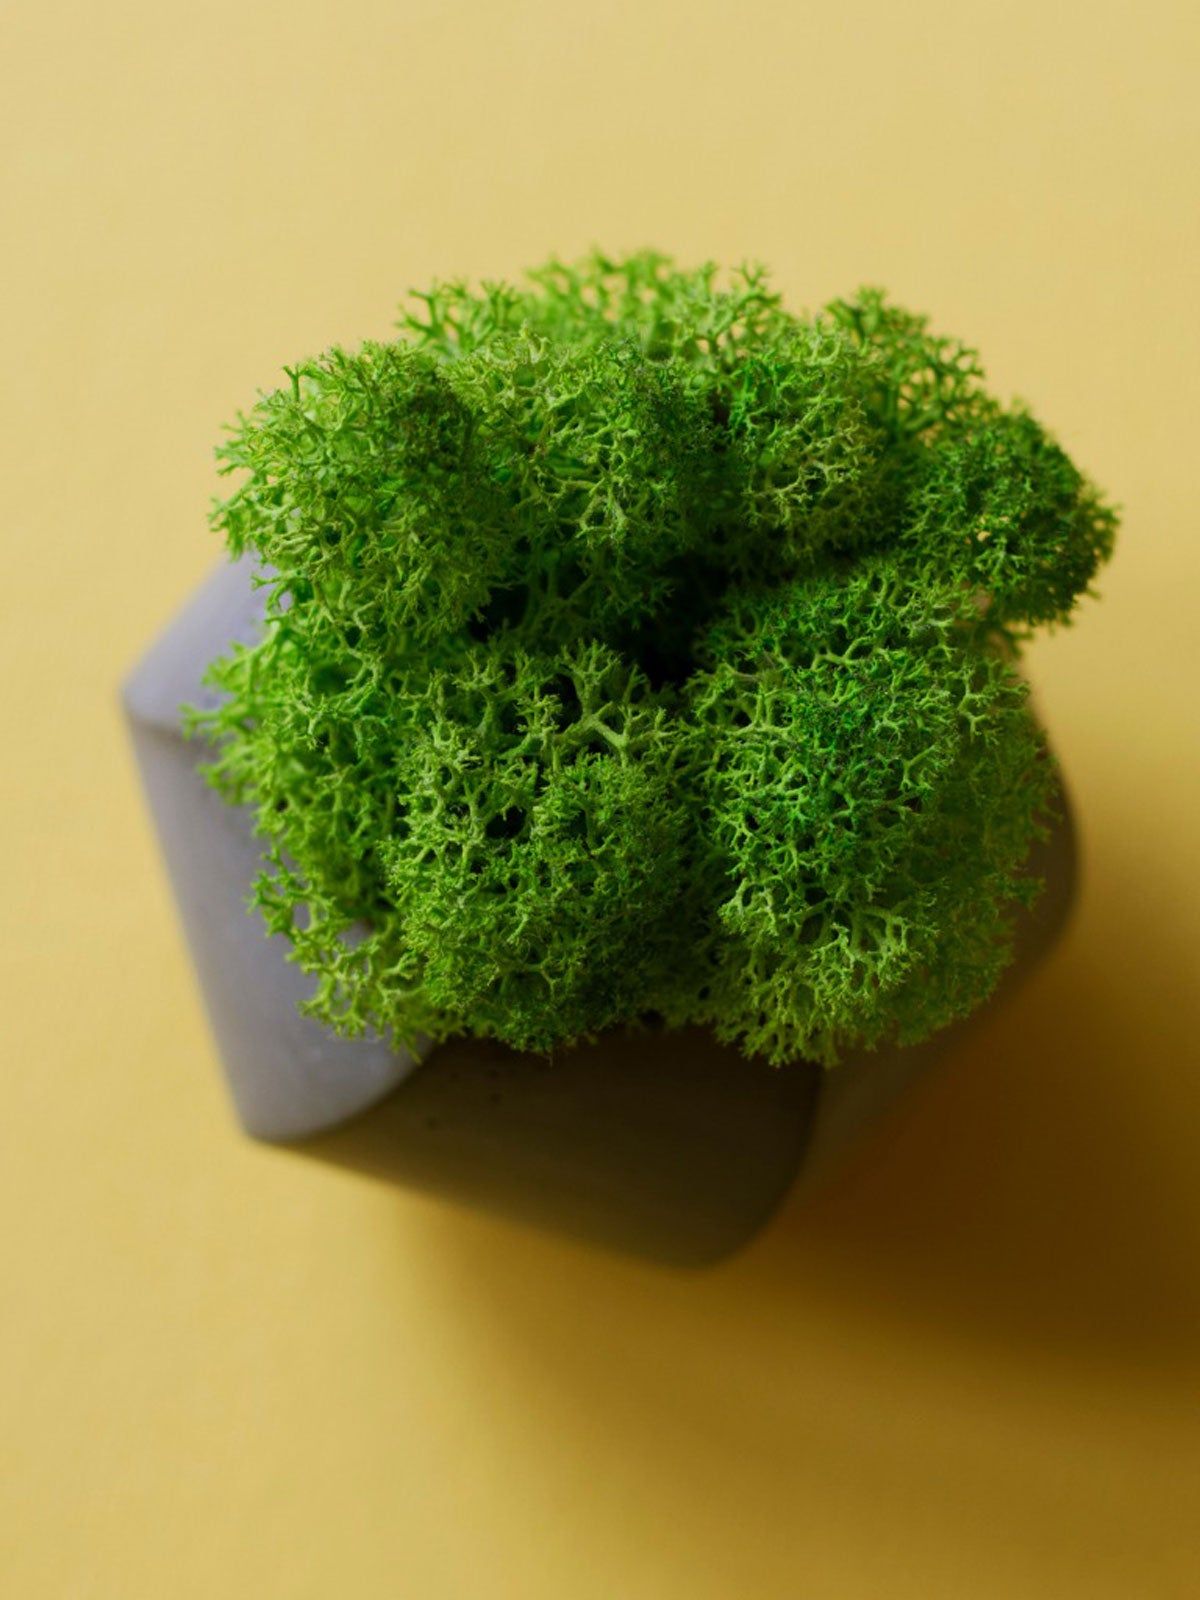 How to Grow Moss Indoors (Quick Guide for Beginners) - Garden Tabs